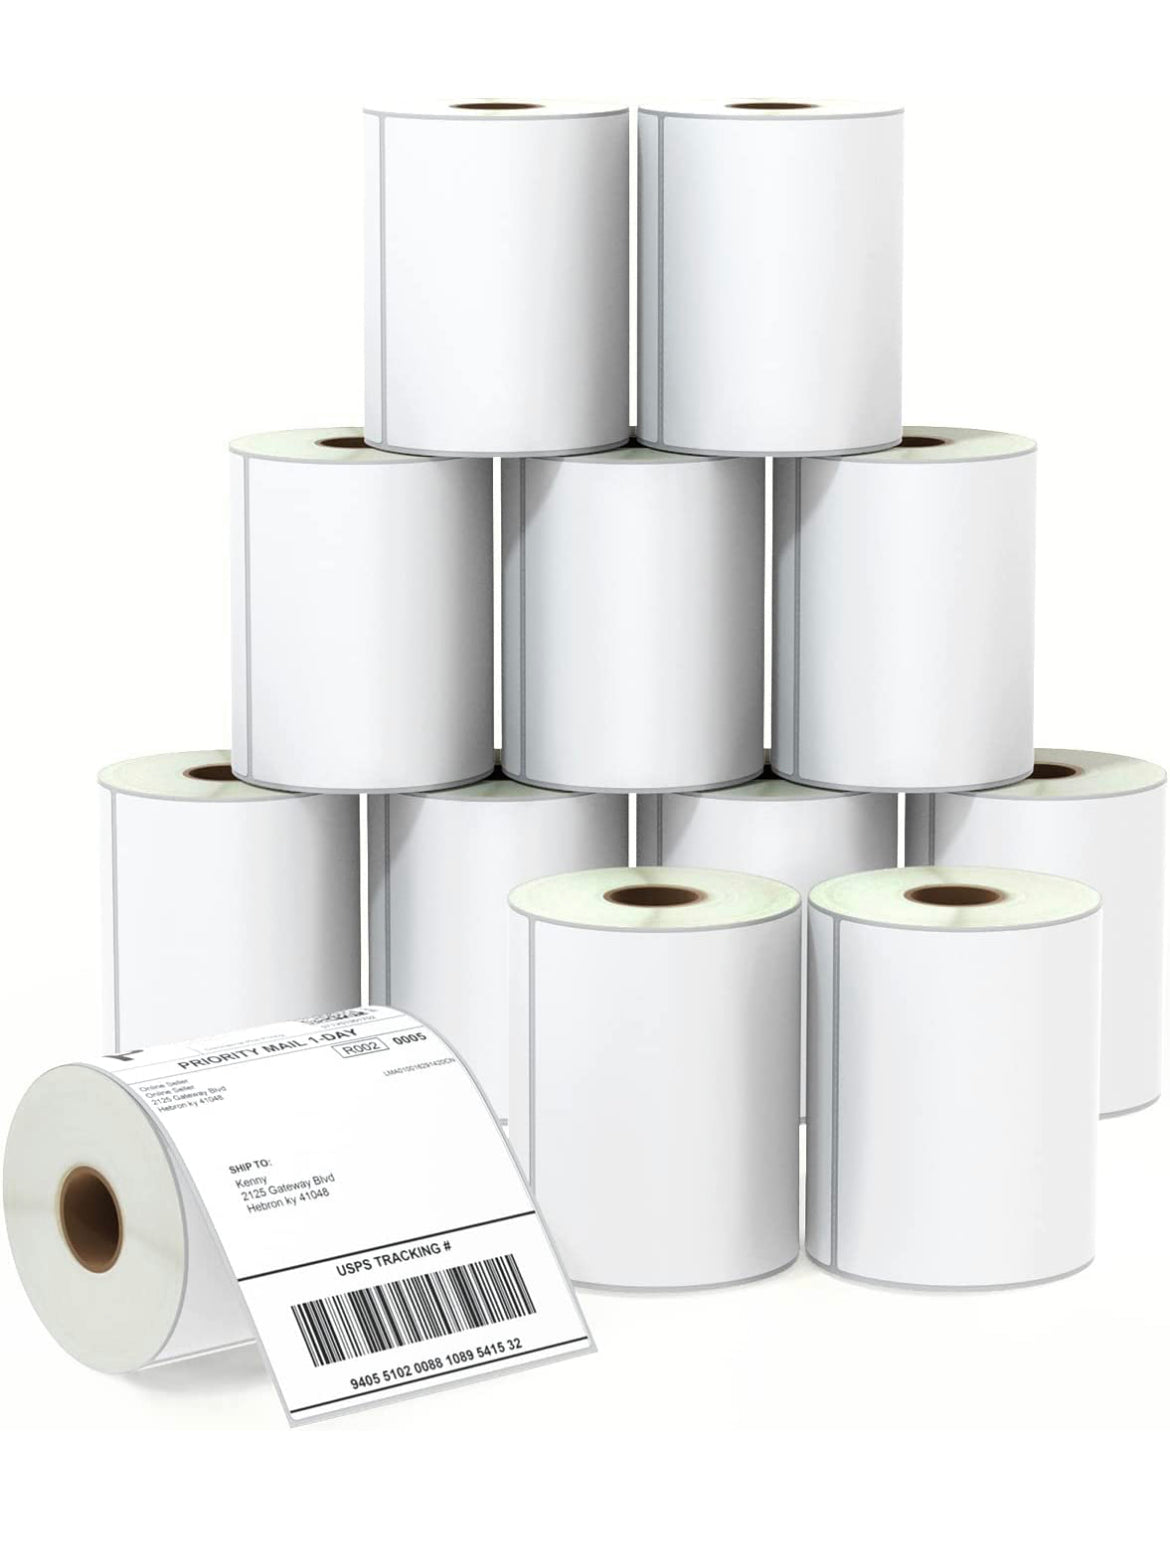 4” x 2” Direct Thermal Labels, 1” Core, 735 Labels/Roll (12 Rolls)